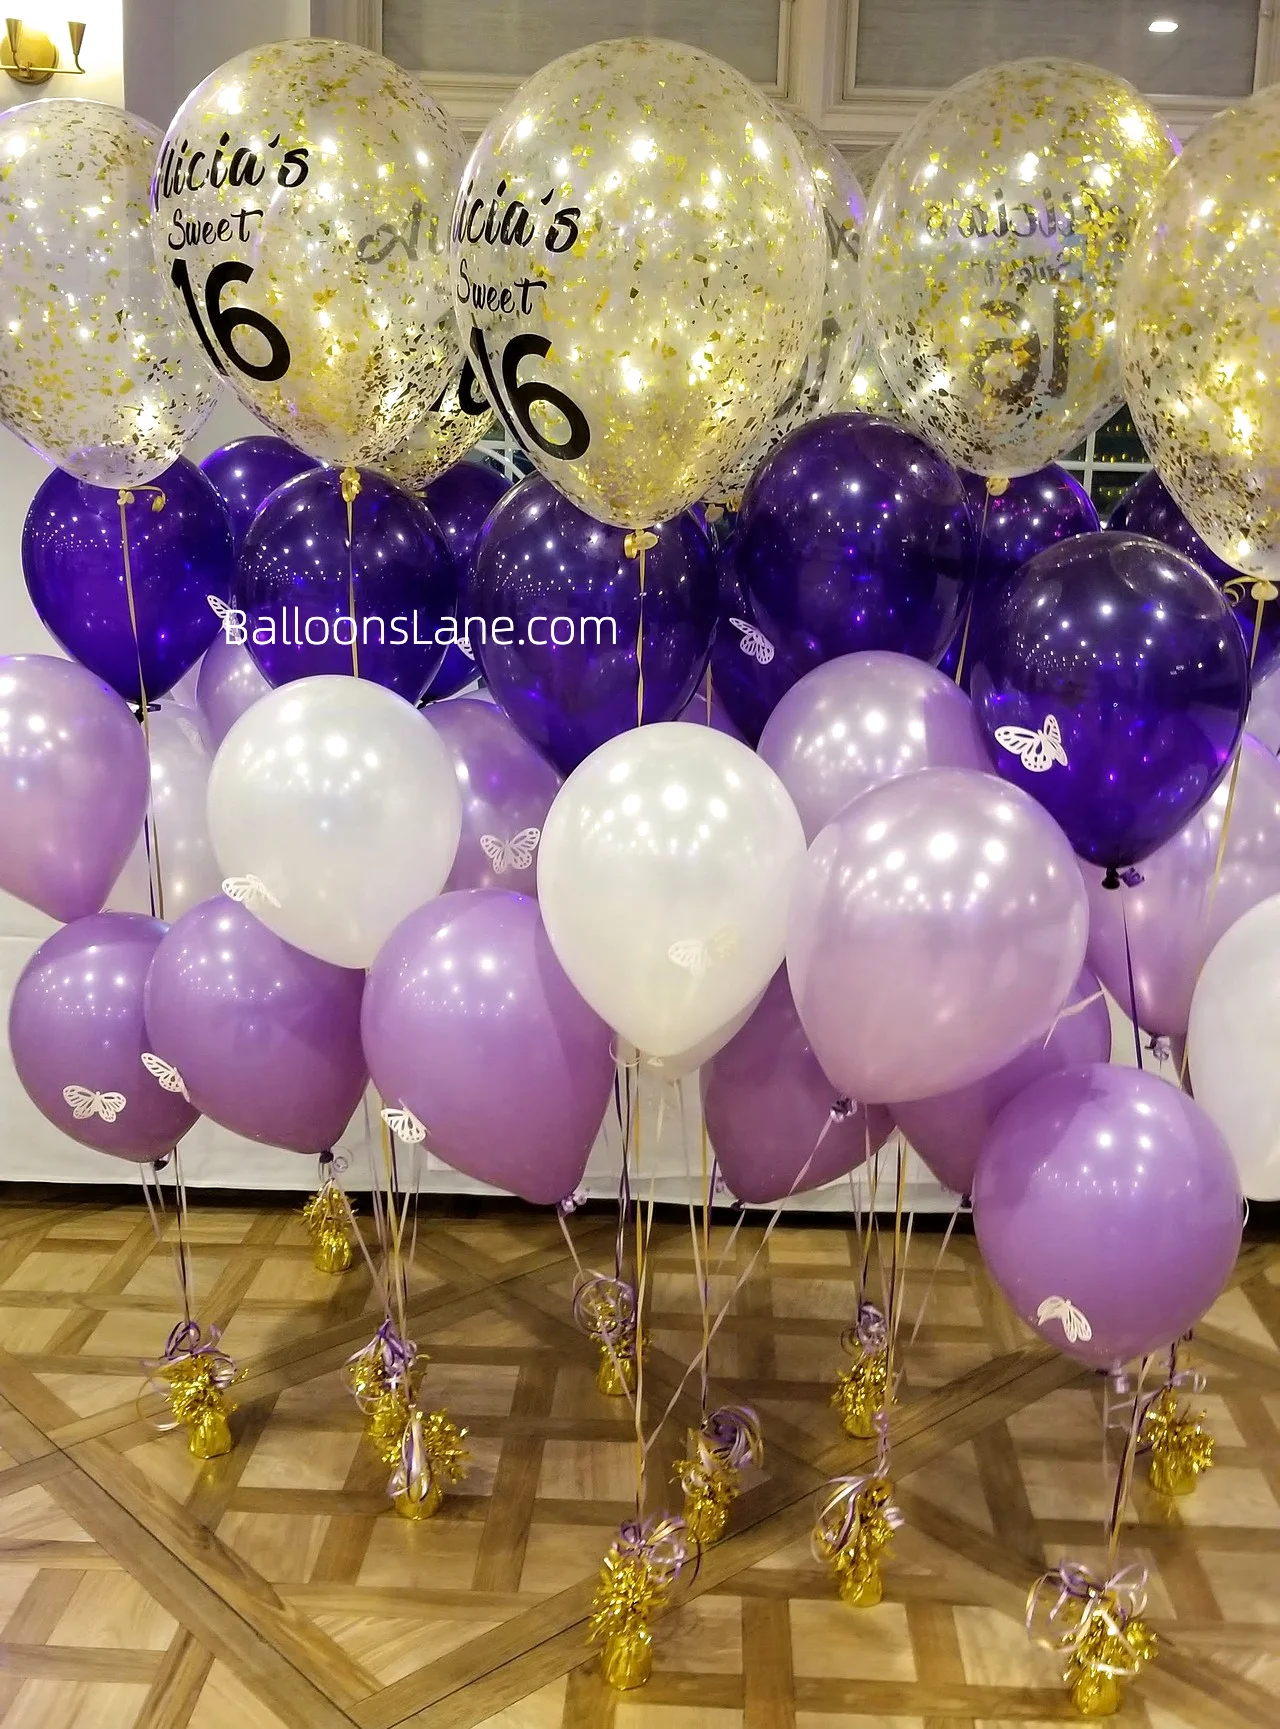 Birth Anniversary Balloon Bouquet: Purple, Blue, and White Balloons with Customized Confetti Balloons in NYC